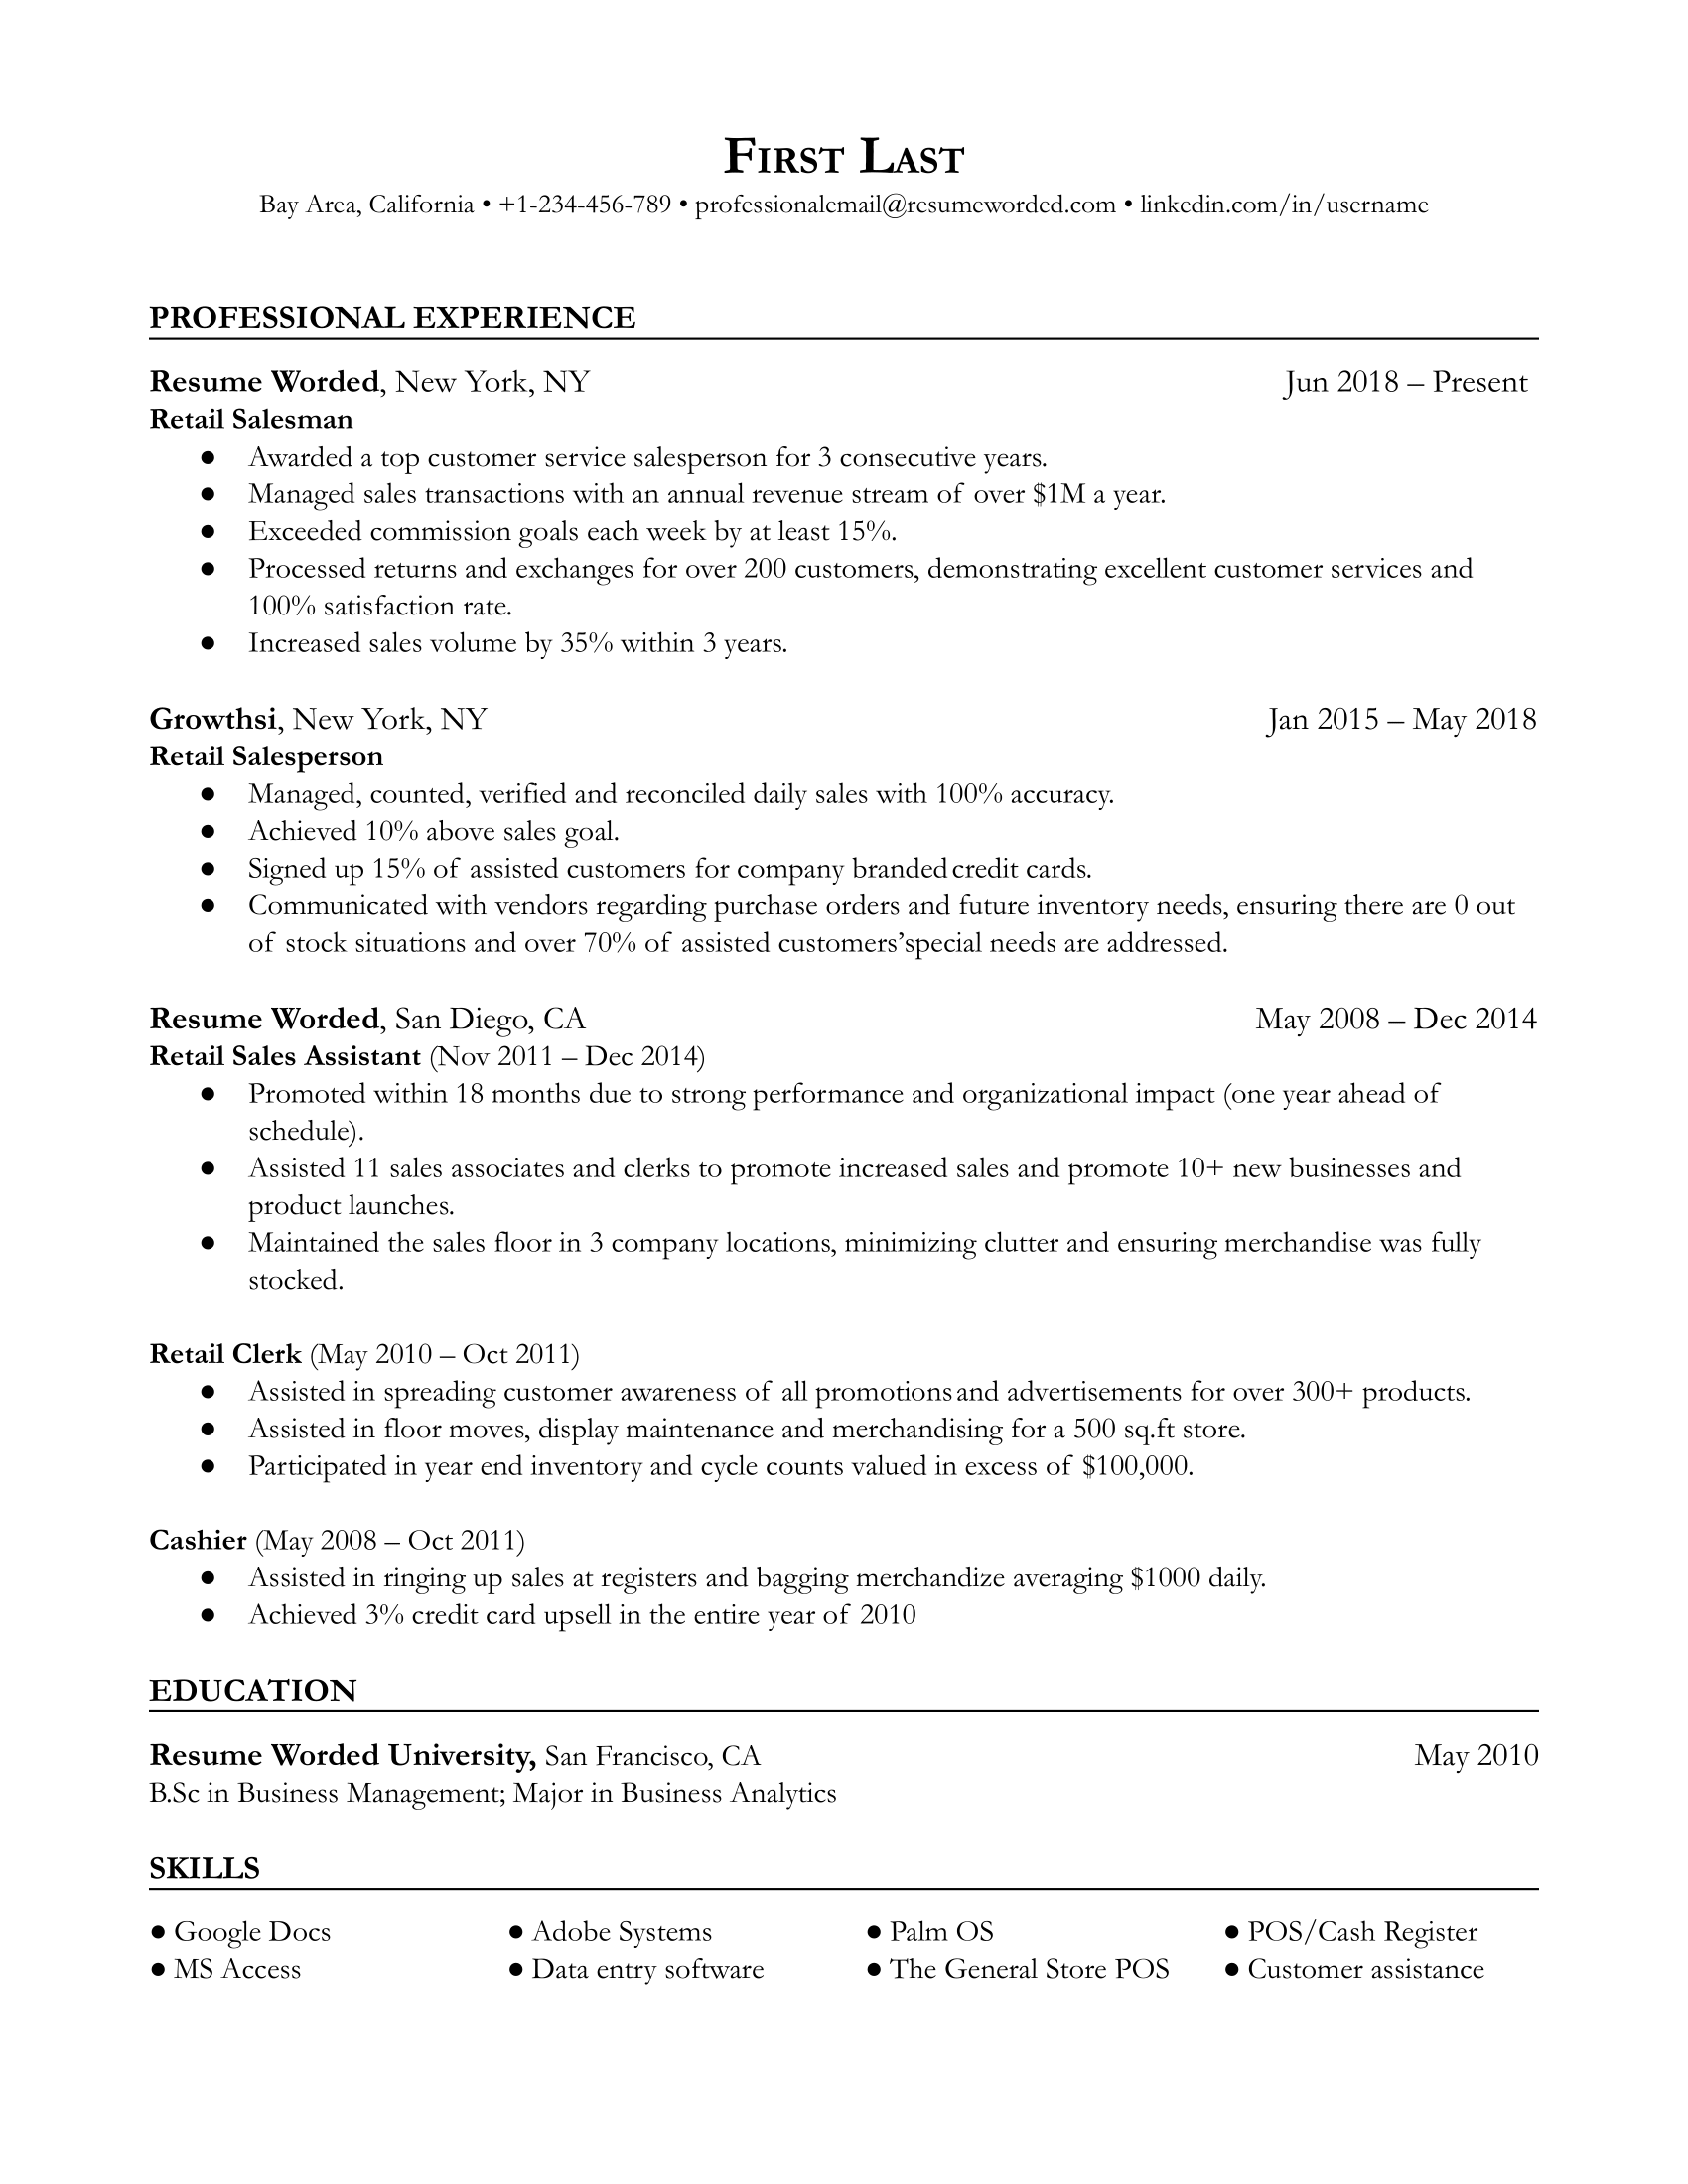 A CV for a retail sales role showcasing sales achievements and product knowledge.